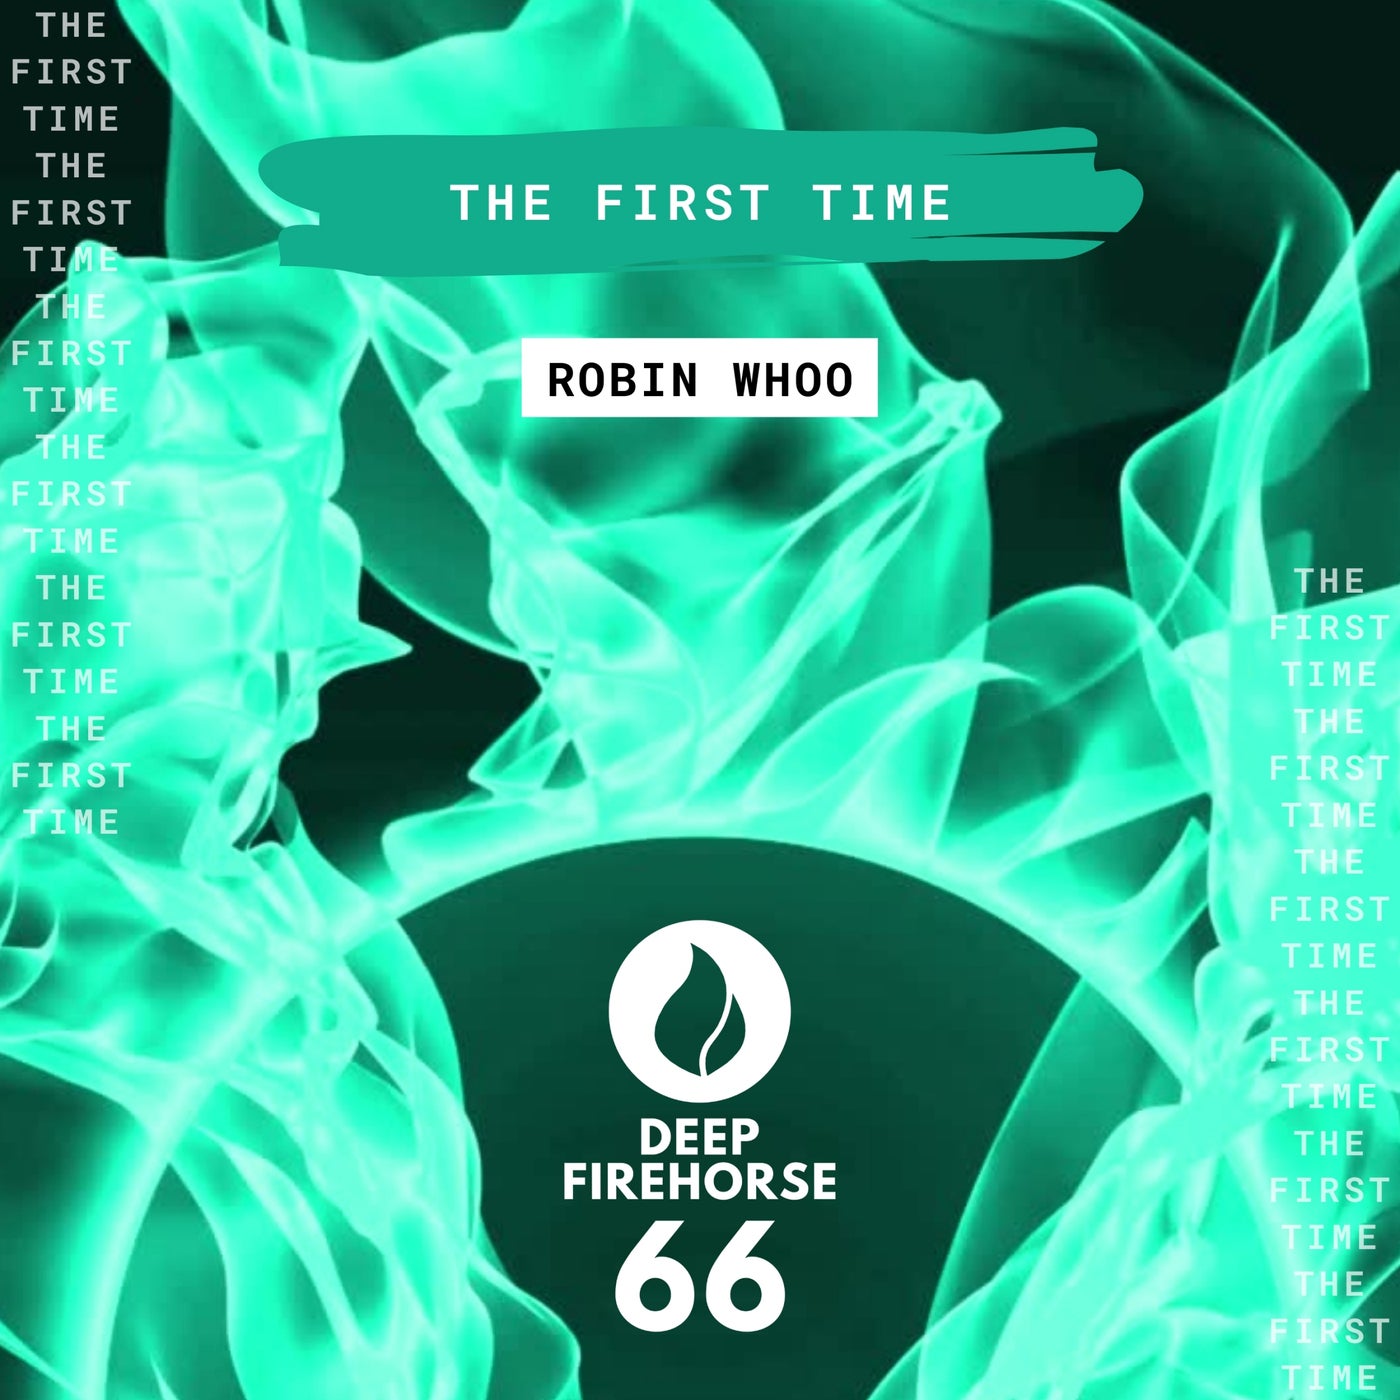 Robin Whoo - The First Time [Deep Firehorse 66]